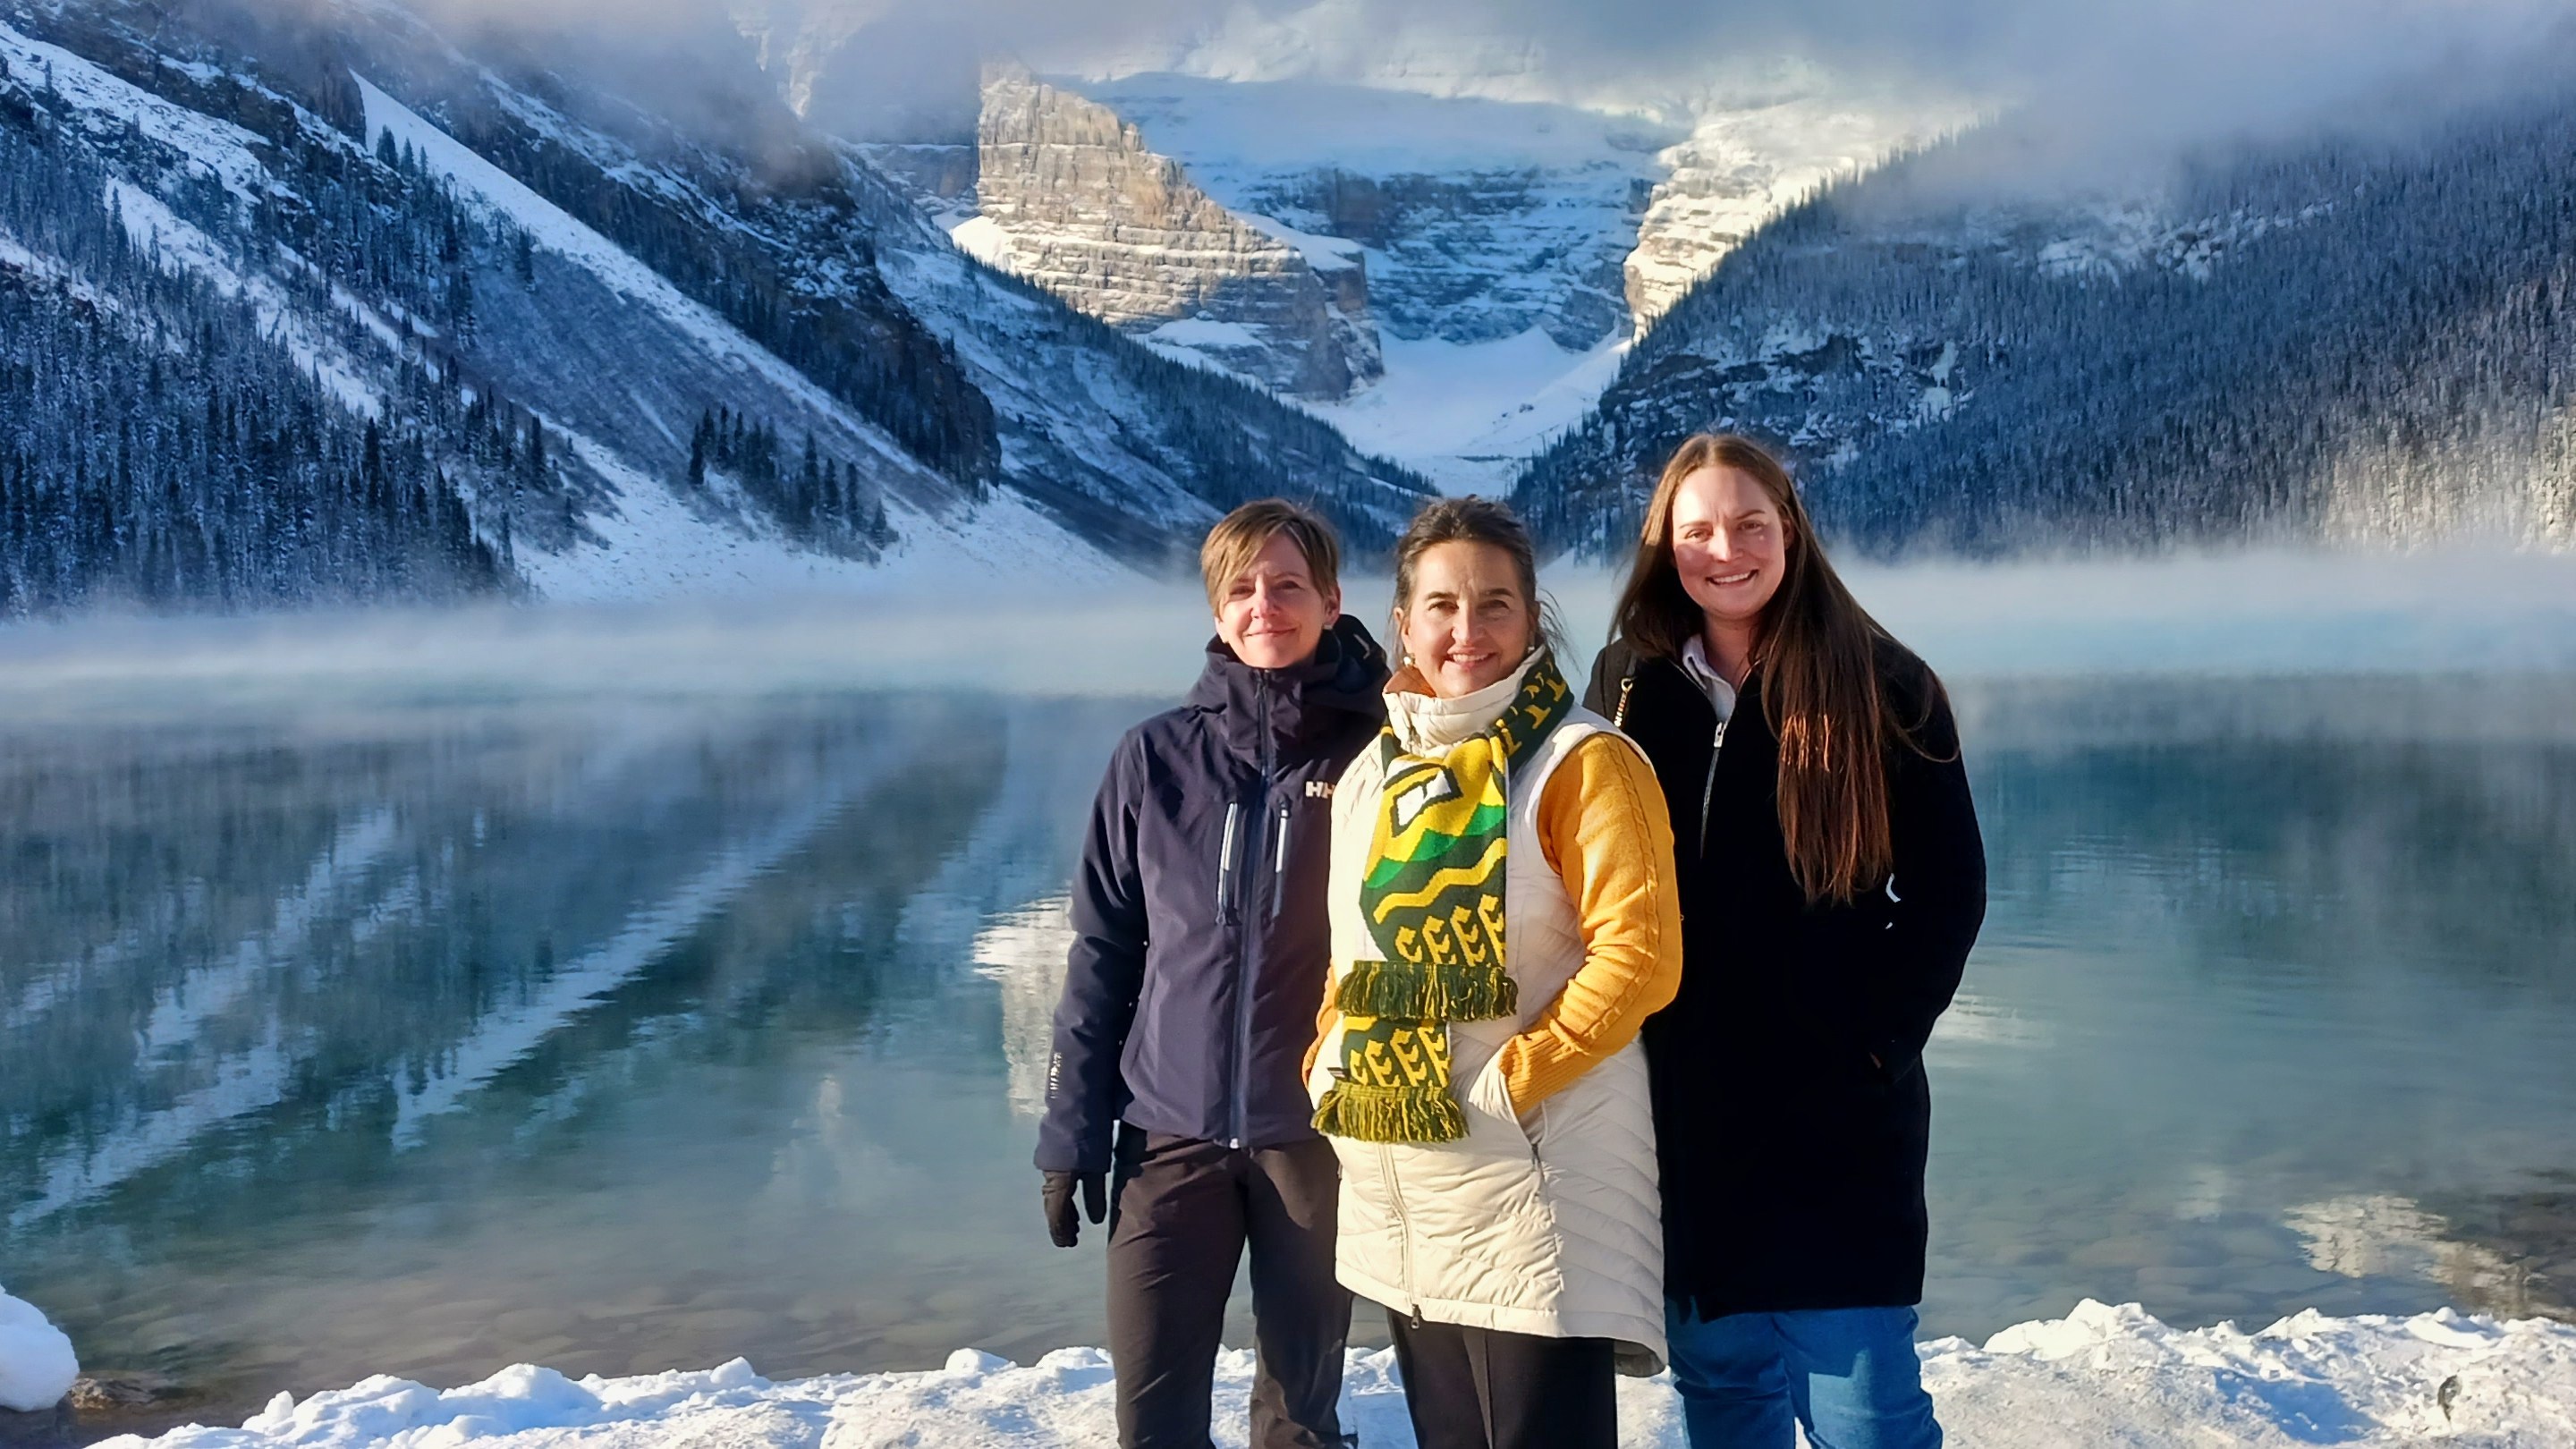 The Ski Like a Girl research team (from left) — historians Lyndsay Conrad, PearlAnn Reichwein and Charlotte Mitchell — are bringing to light unheard histories of women’s contributions to Nordic sport in Western Canada.